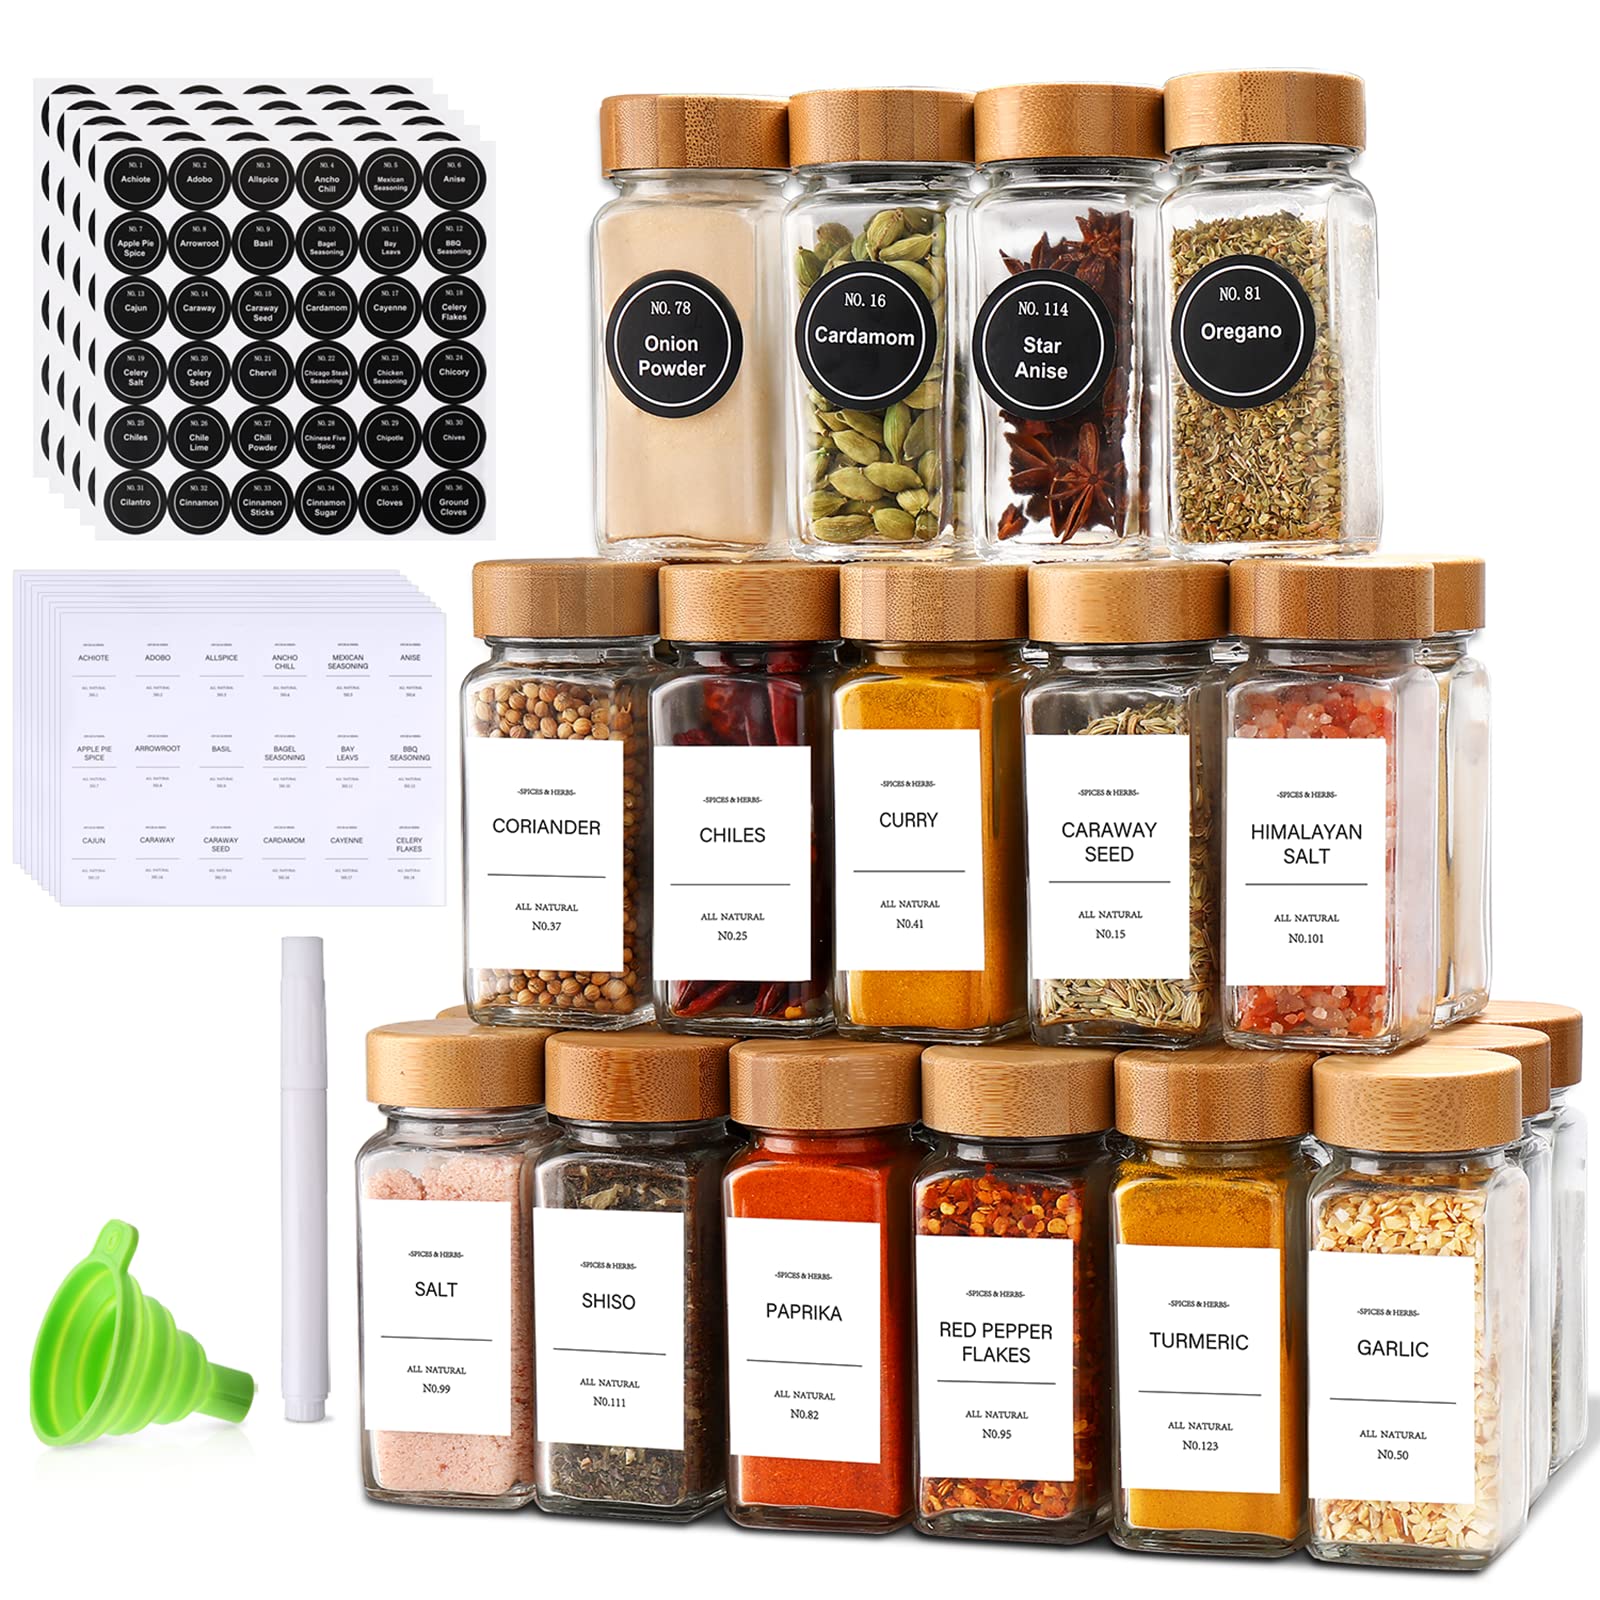 DIMBRAH Spice Jars with Label-4oz 24Pcs, Glass Spice Jars with Bamboo Lids,Spices Container Set with White Printed Spice Labels,Kitchen Empty Spice Jars with Shaker Lids